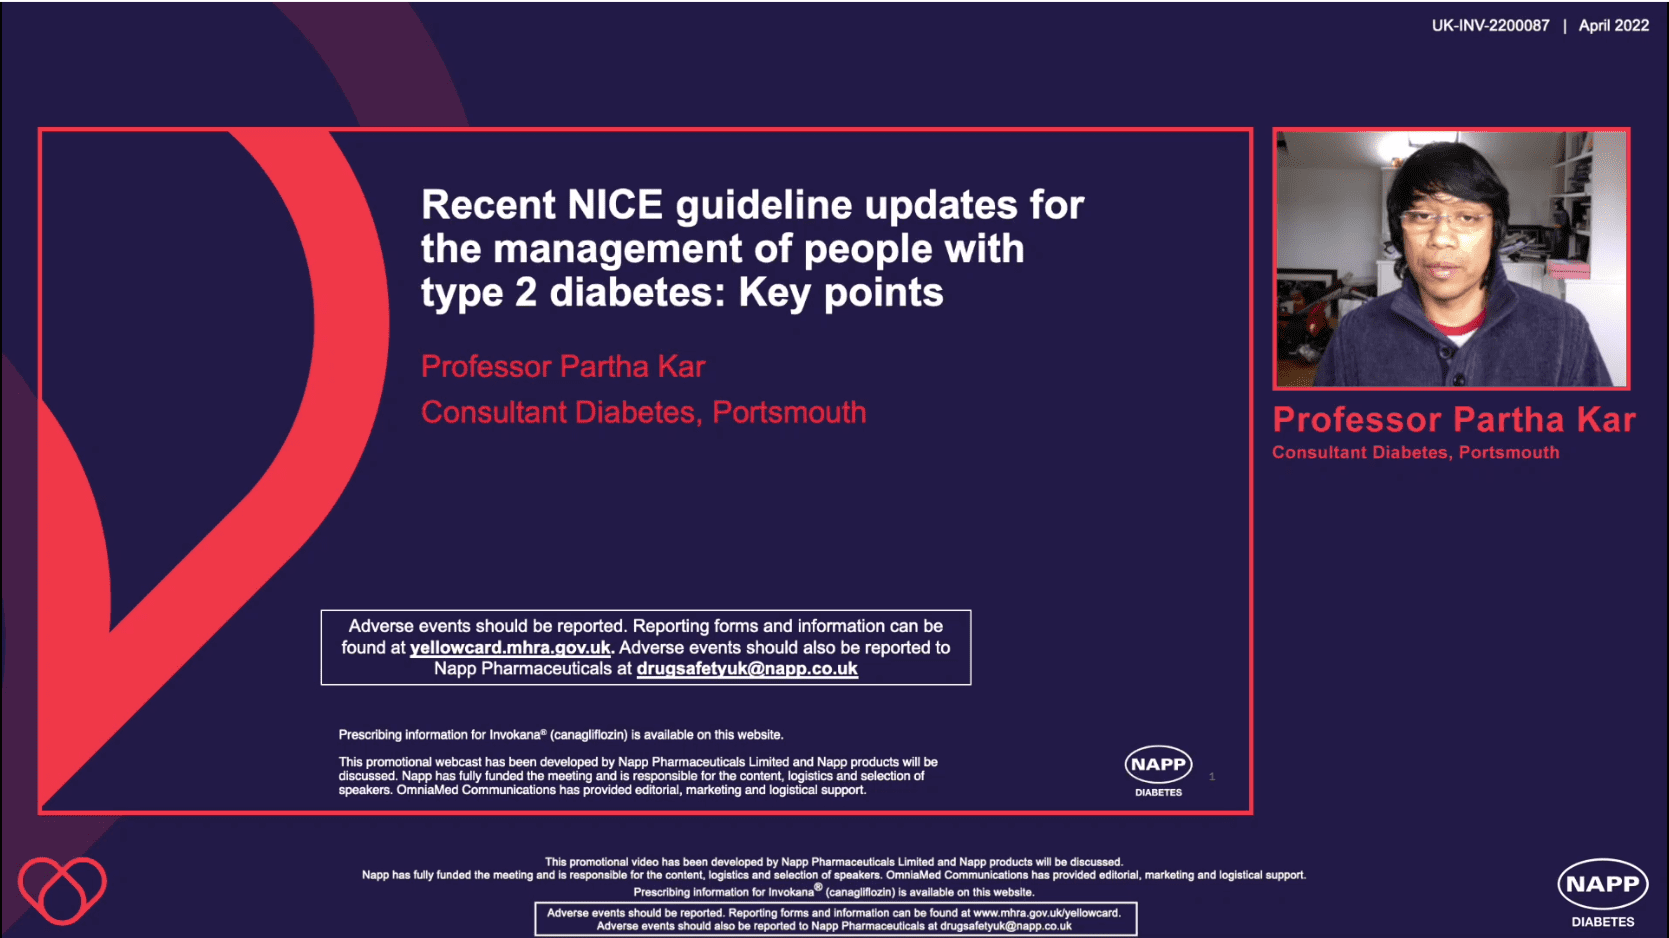 Partha Kar discusses key points from the recently published NICE guideline